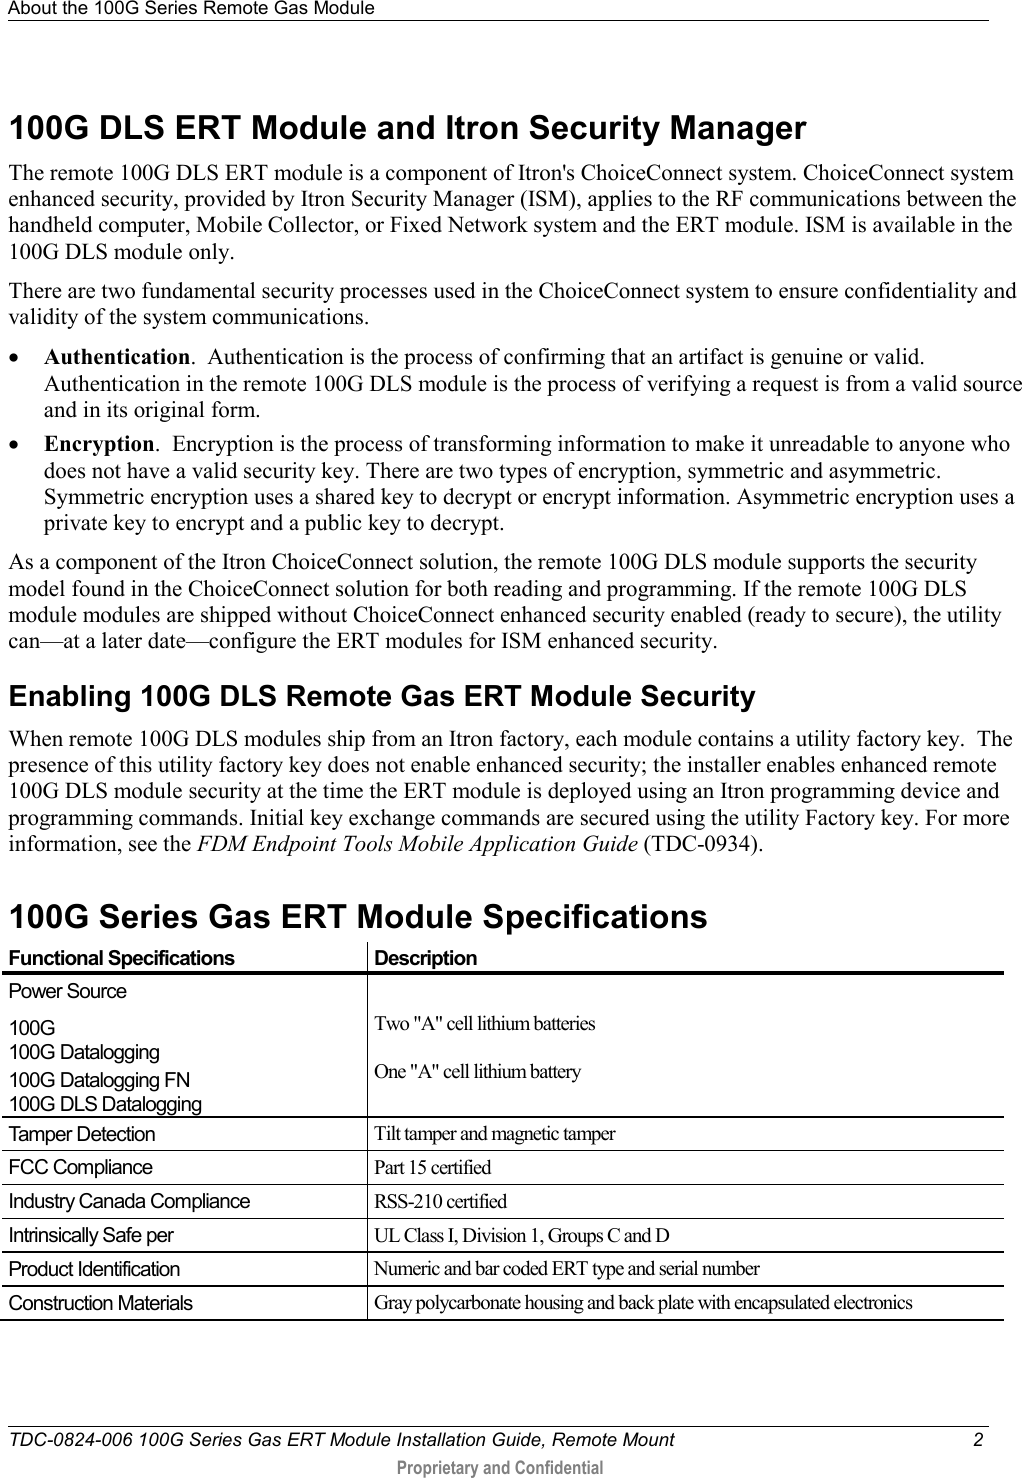 About the 100G Series Remote Gas Module   TDC-0824-006 100G Series Gas ERT Module Installation Guide, Remote Mount  2  Proprietary and Confidential    100G DLS ERT Module and Itron Security Manager The remote 100G DLS ERT module is a component of Itron&apos;s ChoiceConnect system. ChoiceConnect system enhanced security, provided by Itron Security Manager (ISM), applies to the RF communications between the handheld computer, Mobile Collector, or Fixed Network system and the ERT module. ISM is available in the 100G DLS module only.  There are two fundamental security processes used in the ChoiceConnect system to ensure confidentiality and validity of the system communications. • Authentication.  Authentication is the process of confirming that an artifact is genuine or valid. Authentication in the remote 100G DLS module is the process of verifying a request is from a valid source and in its original form. • Encryption.  Encryption is the process of transforming information to make it unreadable to anyone who does not have a valid security key. There are two types of encryption, symmetric and asymmetric. Symmetric encryption uses a shared key to decrypt or encrypt information. Asymmetric encryption uses a private key to encrypt and a public key to decrypt. As a component of the Itron ChoiceConnect solution, the remote 100G DLS module supports the security model found in the ChoiceConnect solution for both reading and programming. If the remote 100G DLS module modules are shipped without ChoiceConnect enhanced security enabled (ready to secure), the utility can—at a later date—configure the ERT modules for ISM enhanced security.    Enabling 100G DLS Remote Gas ERT Module Security When remote 100G DLS modules ship from an Itron factory, each module contains a utility factory key.  The presence of this utility factory key does not enable enhanced security; the installer enables enhanced remote 100G DLS module security at the time the ERT module is deployed using an Itron programming device and programming commands. Initial key exchange commands are secured using the utility Factory key. For more information, see the FDM Endpoint Tools Mobile Application Guide (TDC-0934).  100G Series Gas ERT Module Specifications  Functional Specifications Description Power Source 100G 100G Datalogging 100G Datalogging FN 100G DLS Datalogging  Two &quot;A&quot; cell lithium batteries  One &quot;A&quot; cell lithium battery Tamper Detection Tilt tamper and magnetic tamper FCC Compliance Part 15 certified Industry Canada Compliance RSS-210 certified Intrinsically Safe per UL Class I, Division 1, Groups C and D Product Identification Numeric and bar coded ERT type and serial number Construction Materials Gray polycarbonate housing and back plate with encapsulated electronics    